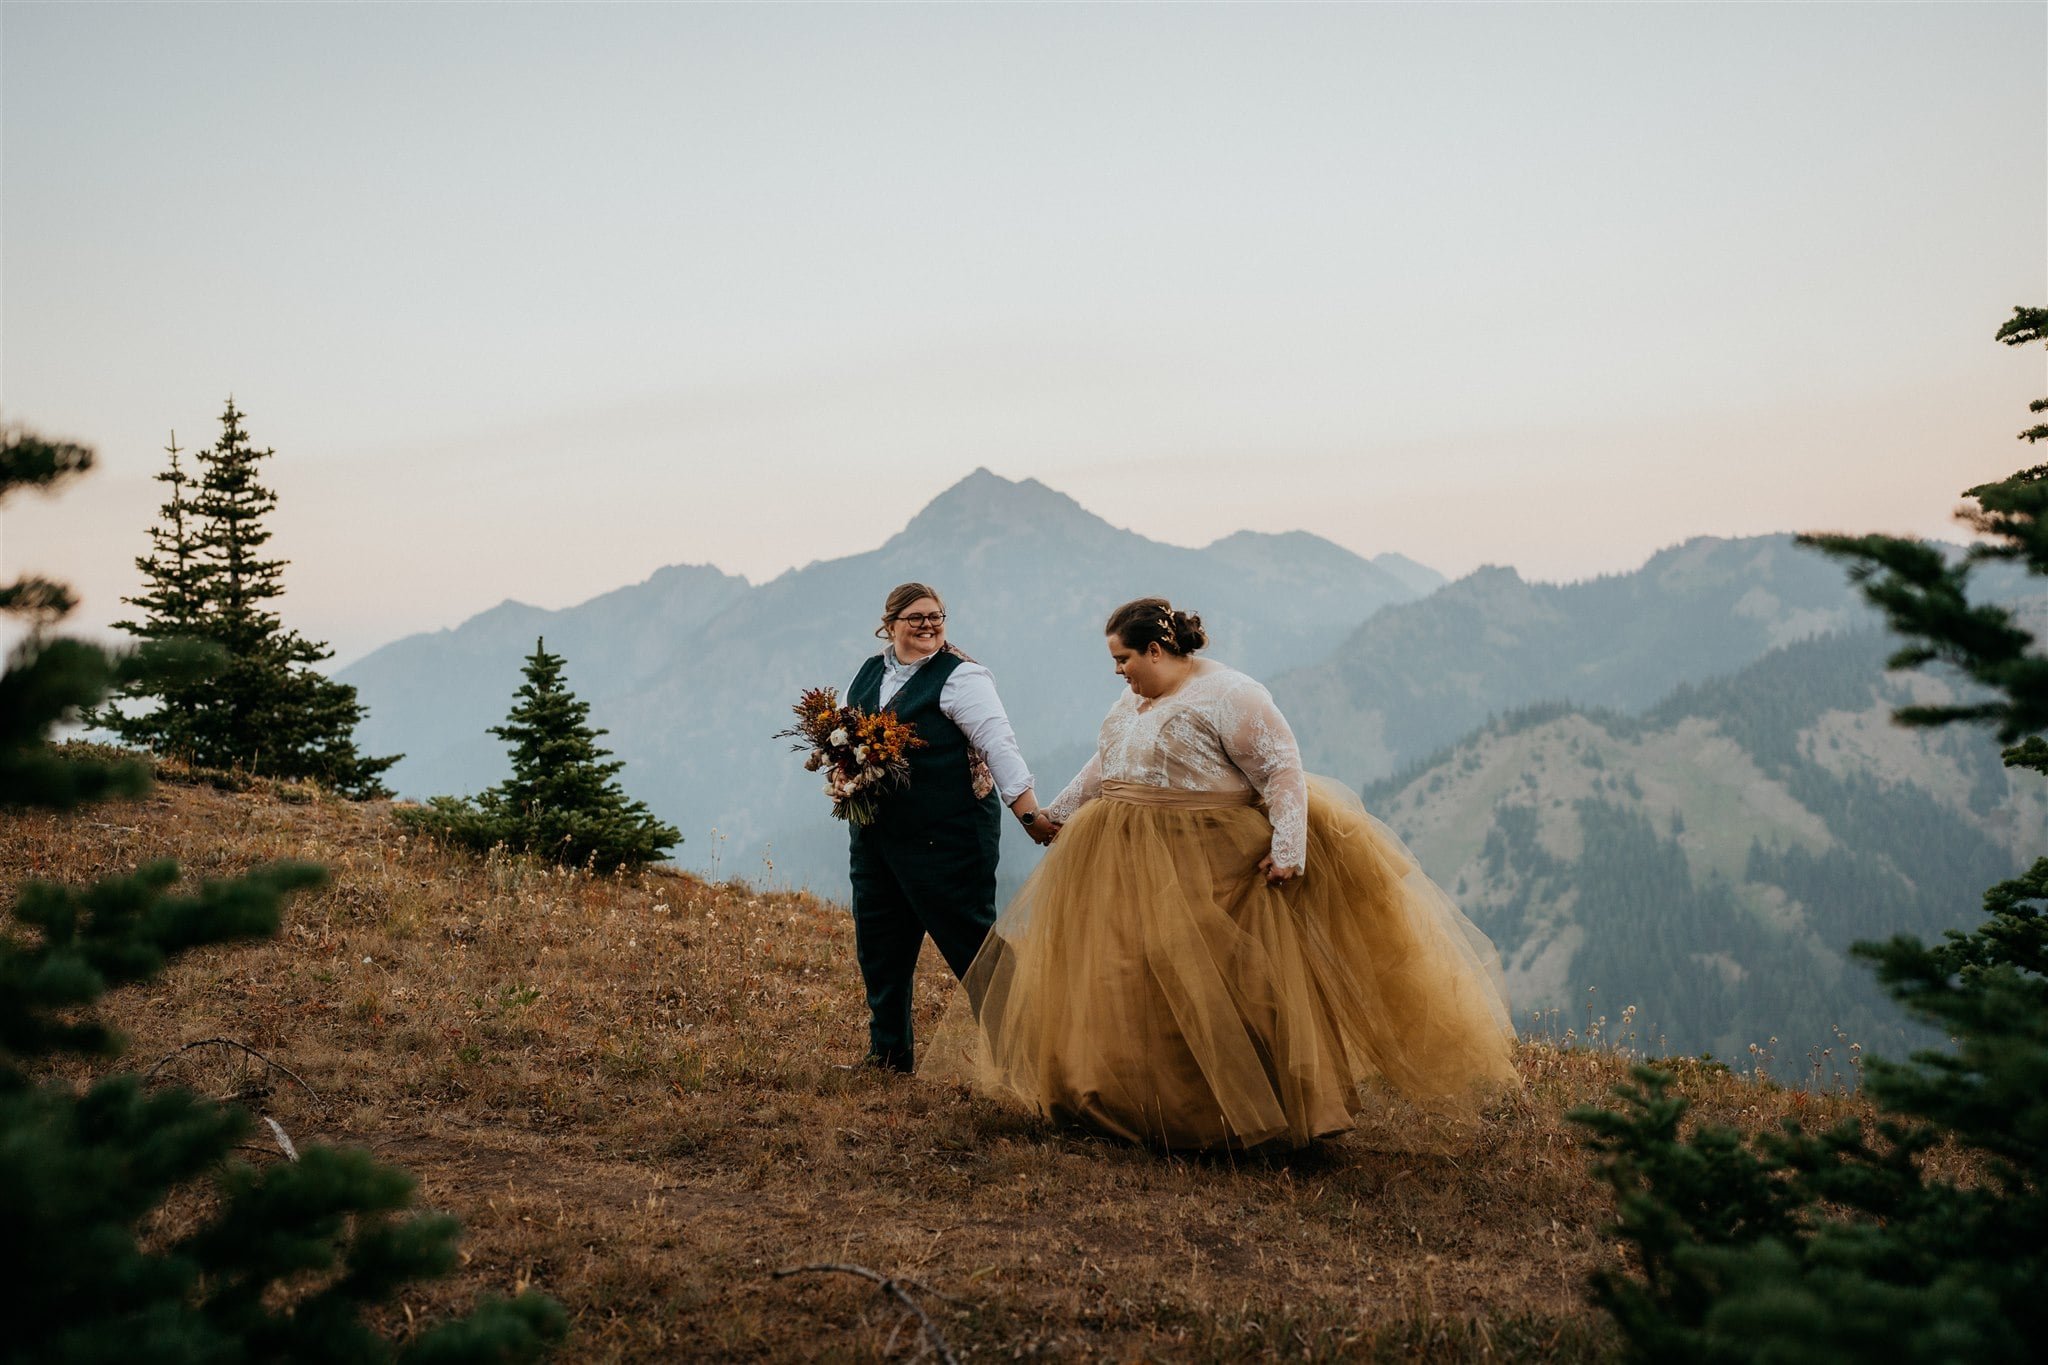 Brides walk through a meadow at sunset during their Lake Crescent elopement